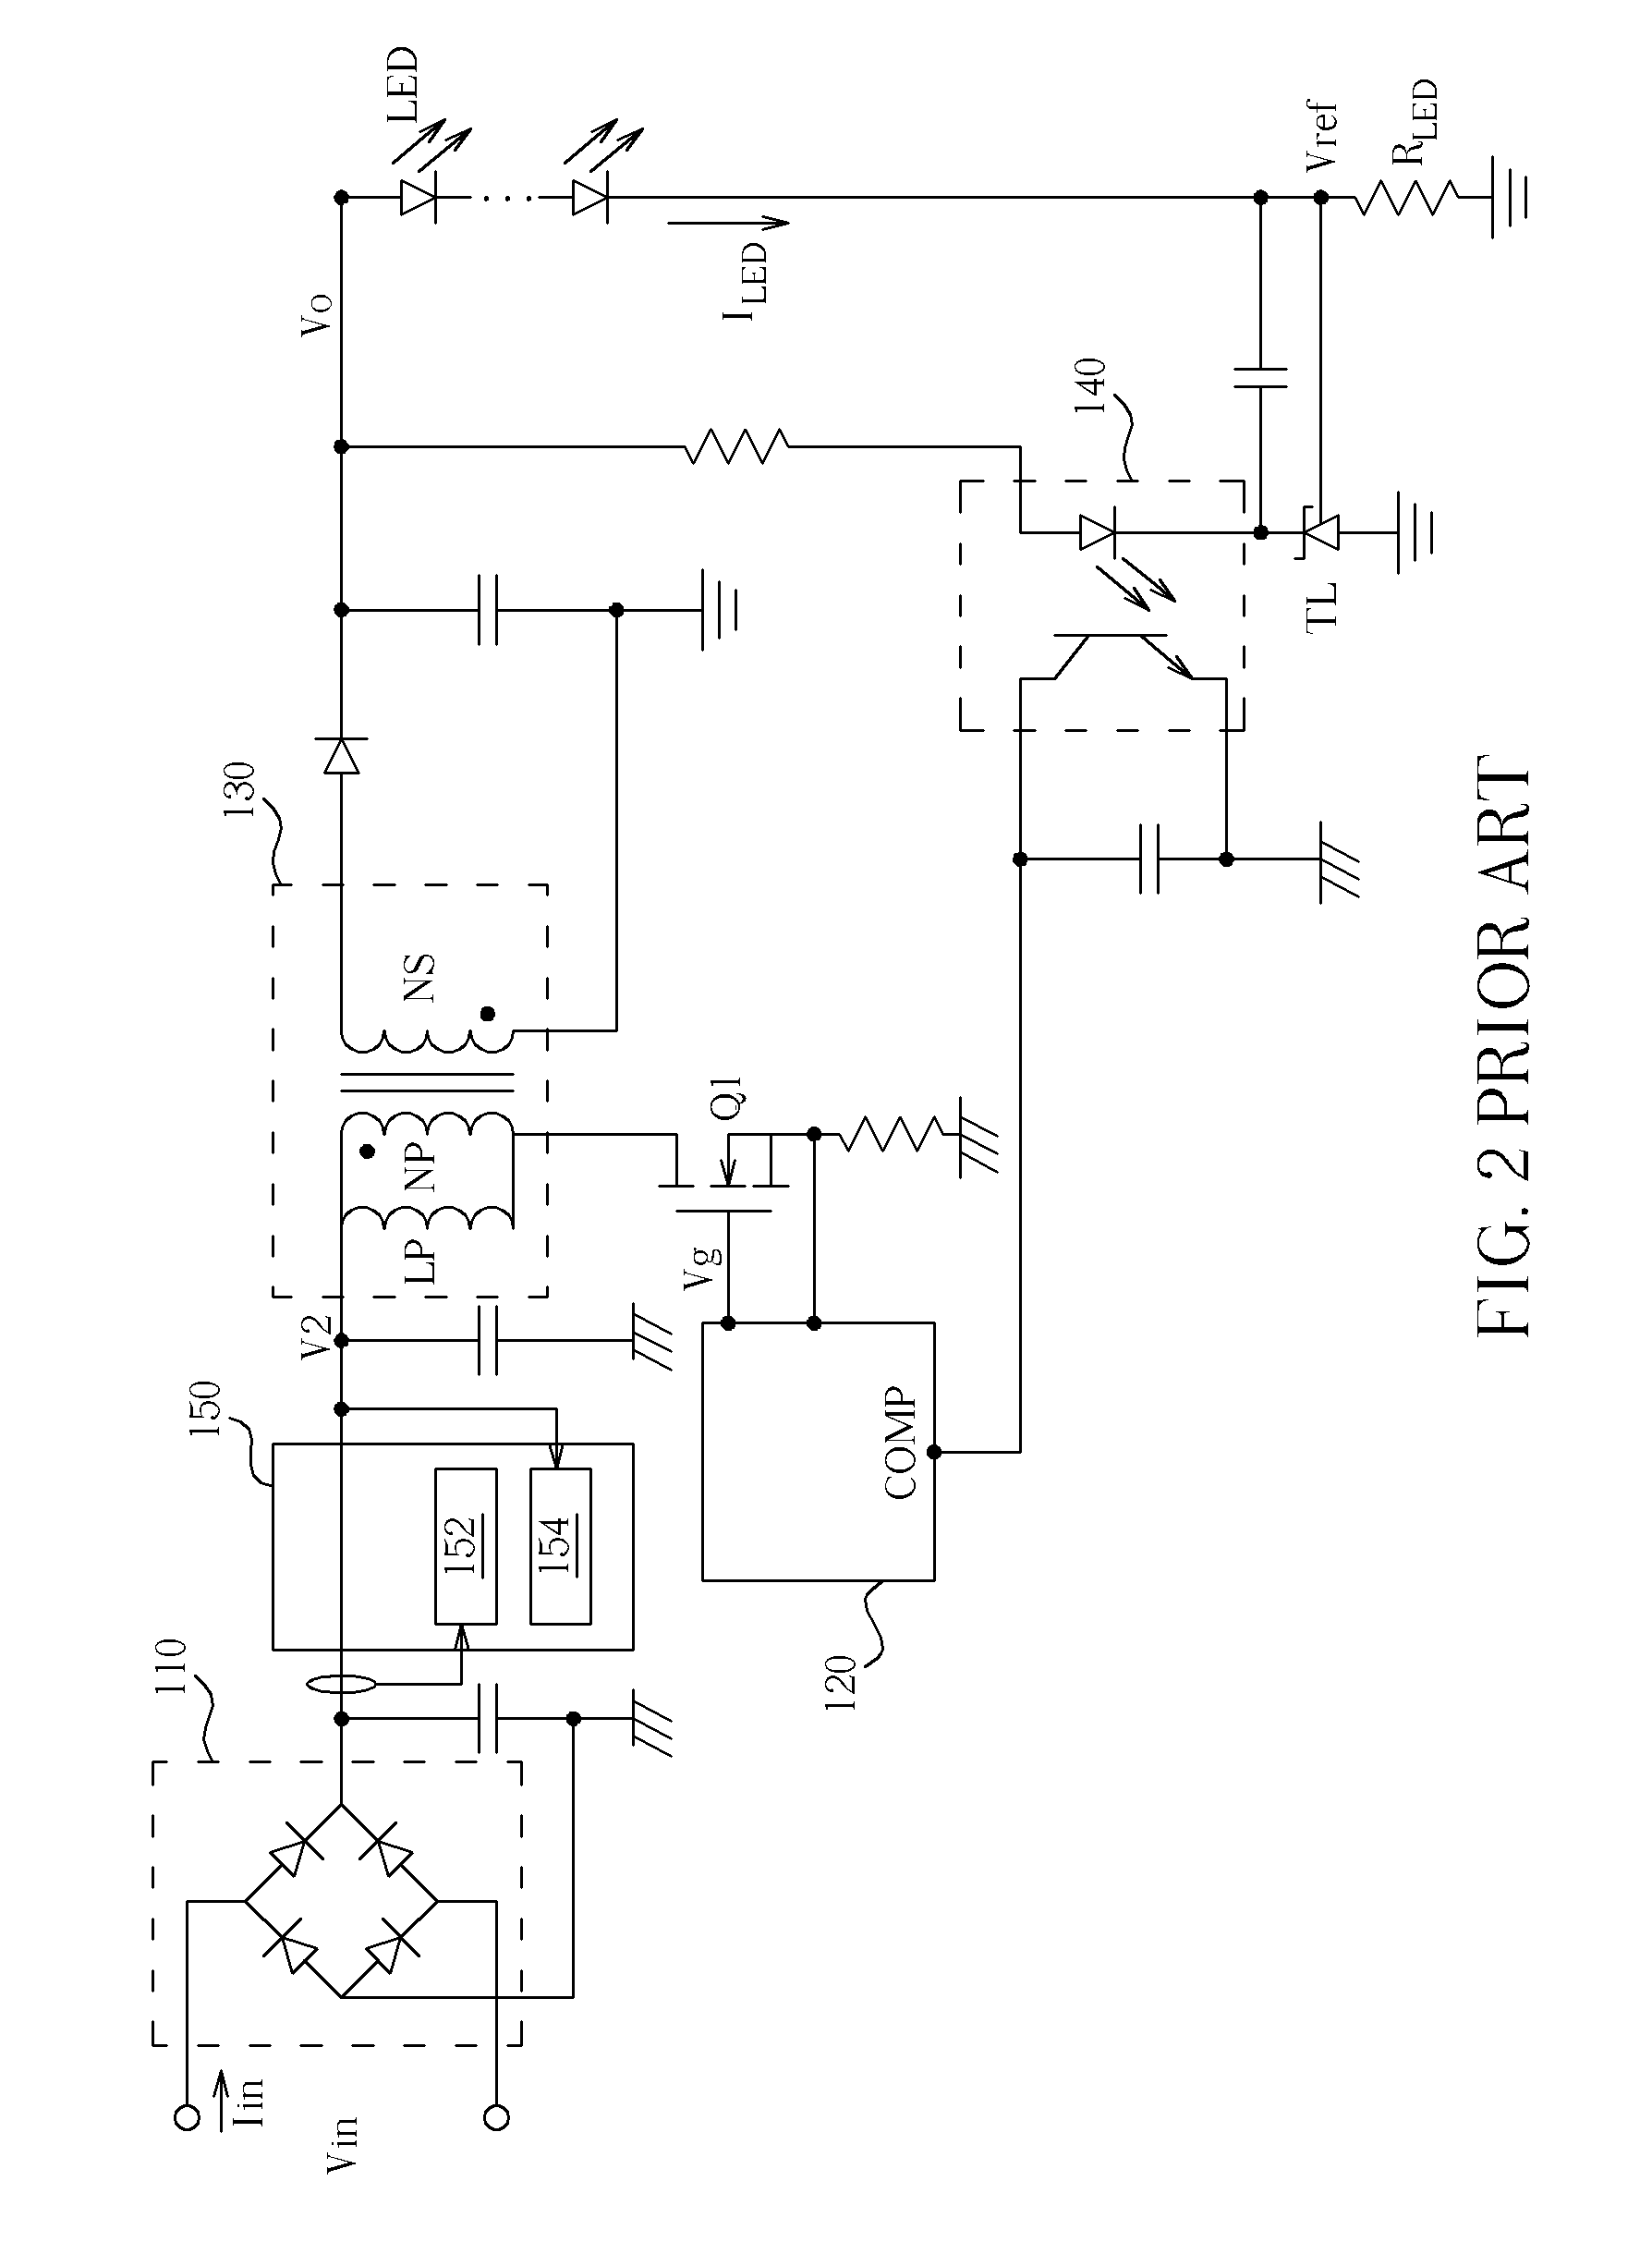 Light Emitting Diode (LED) Driving Device